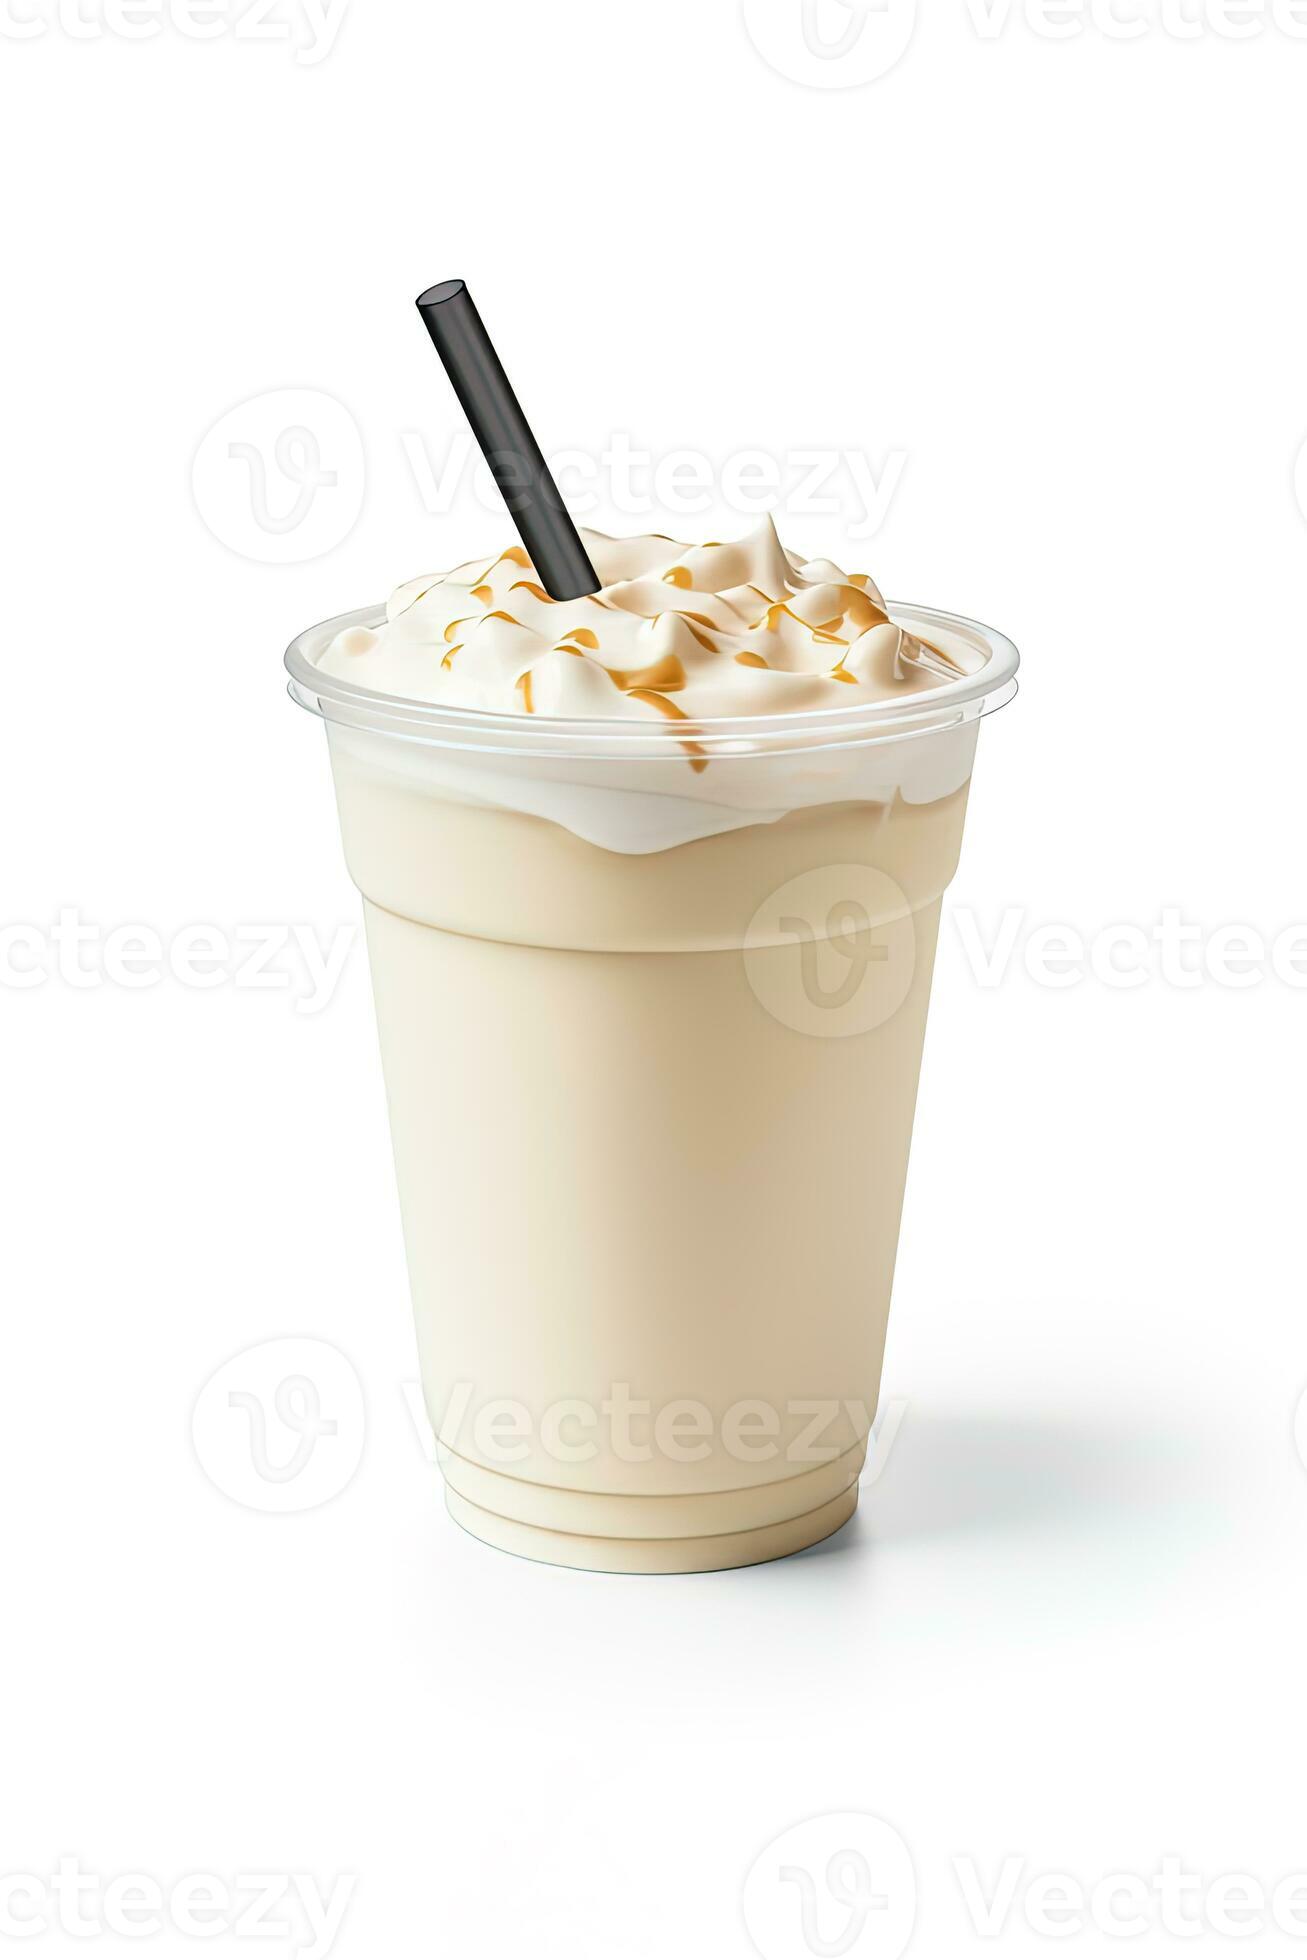 https://static.vecteezy.com/system/resources/previews/026/237/104/large_2x/vanilla-milkshake-in-plastic-takeaway-cup-isolated-on-white-background-ai-generated-photo.jpg